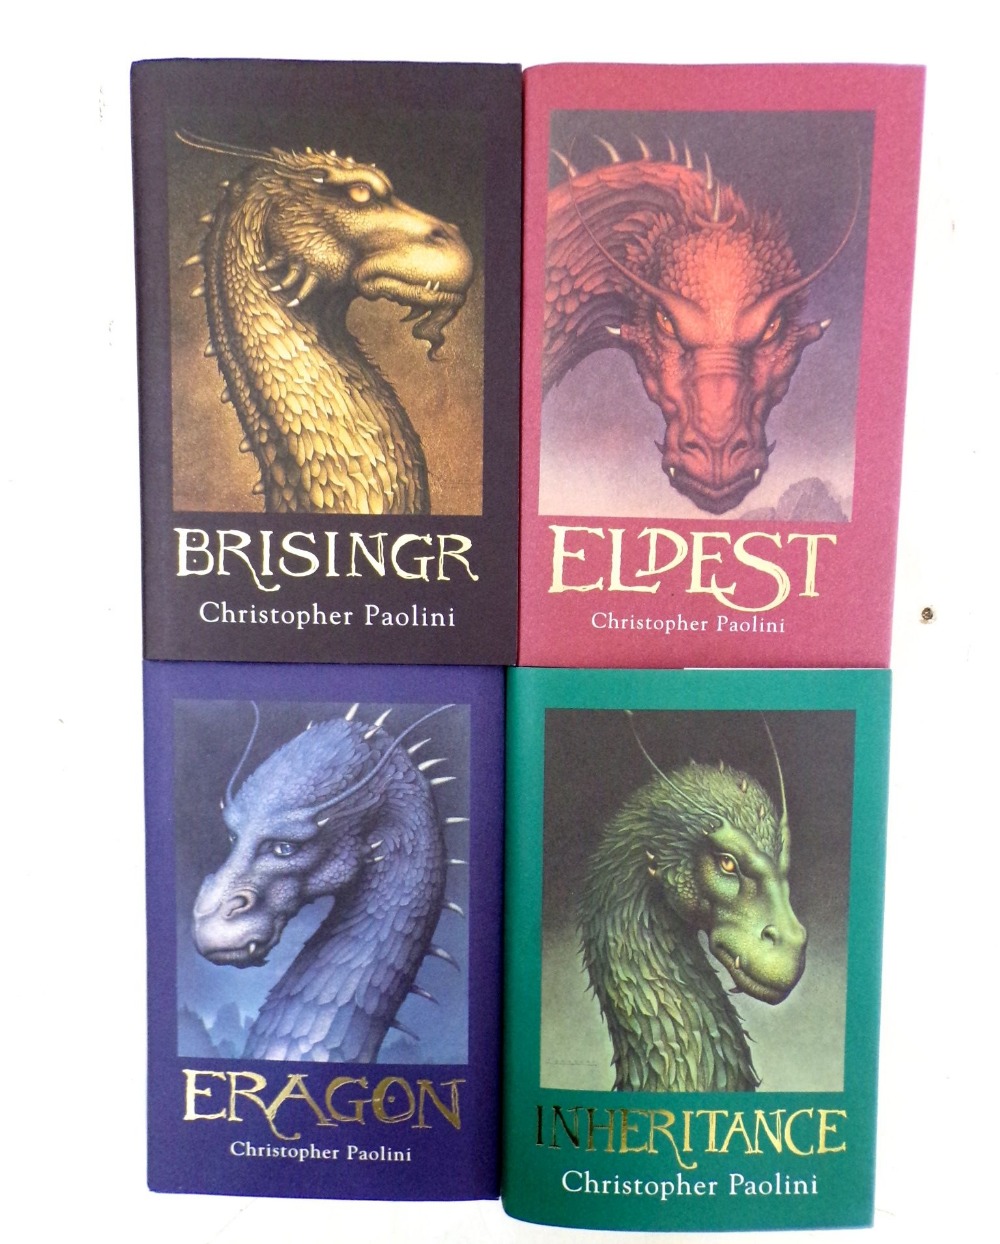 An extensive collection of fantasy inspired books including The four Inheritance Cycle titles by